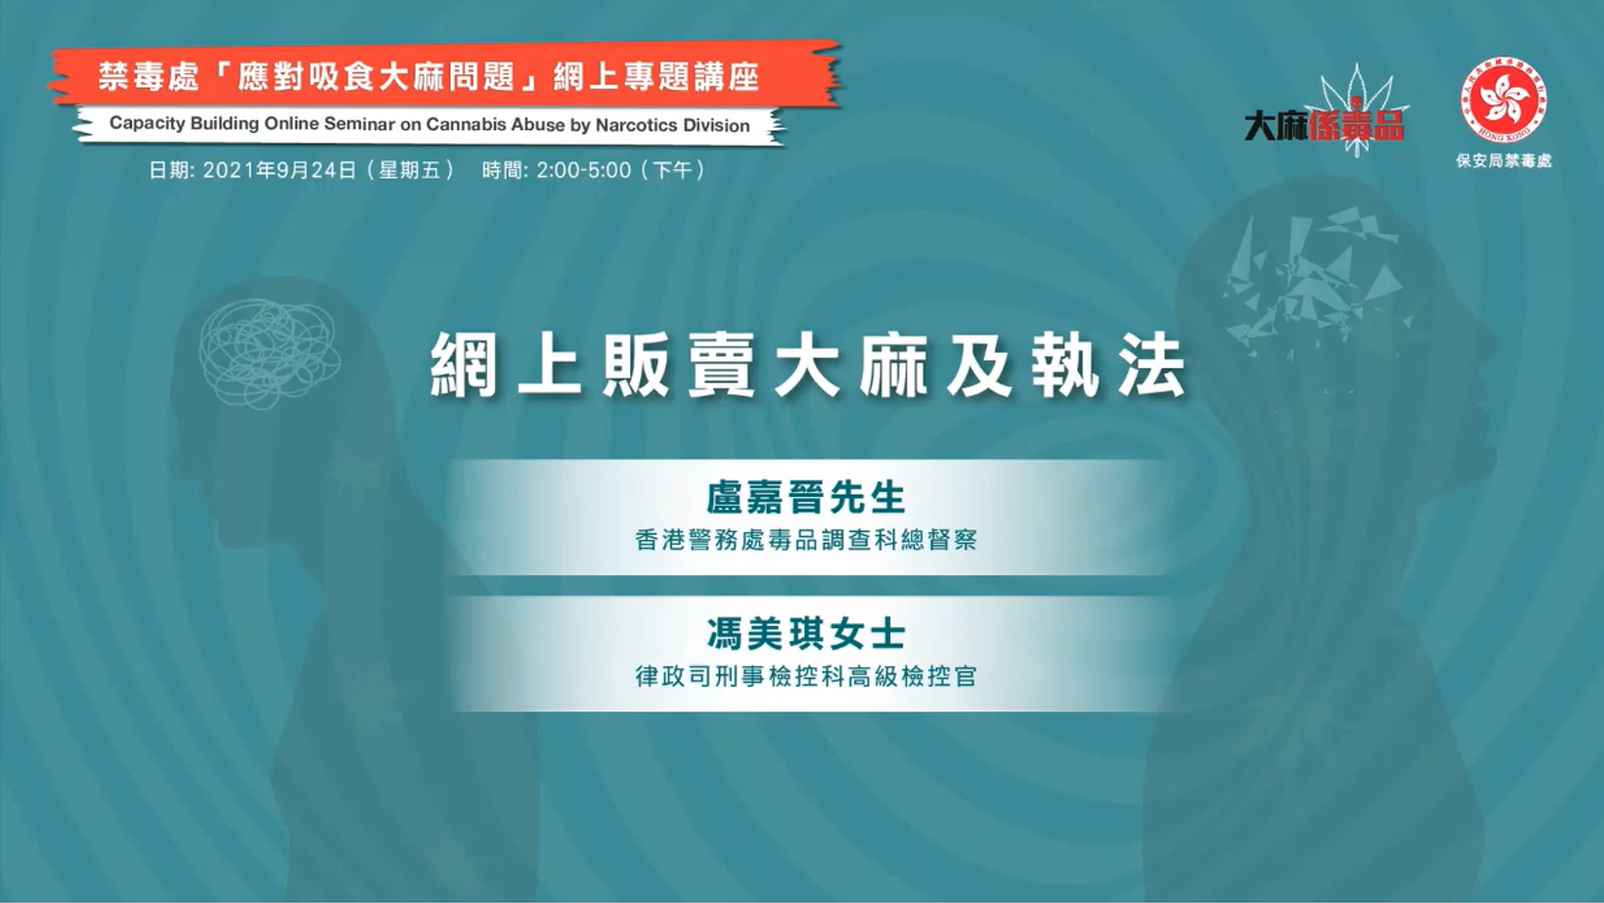 Cyber Sale of Cannabis and Enforcement (Chinese only) Video Clips